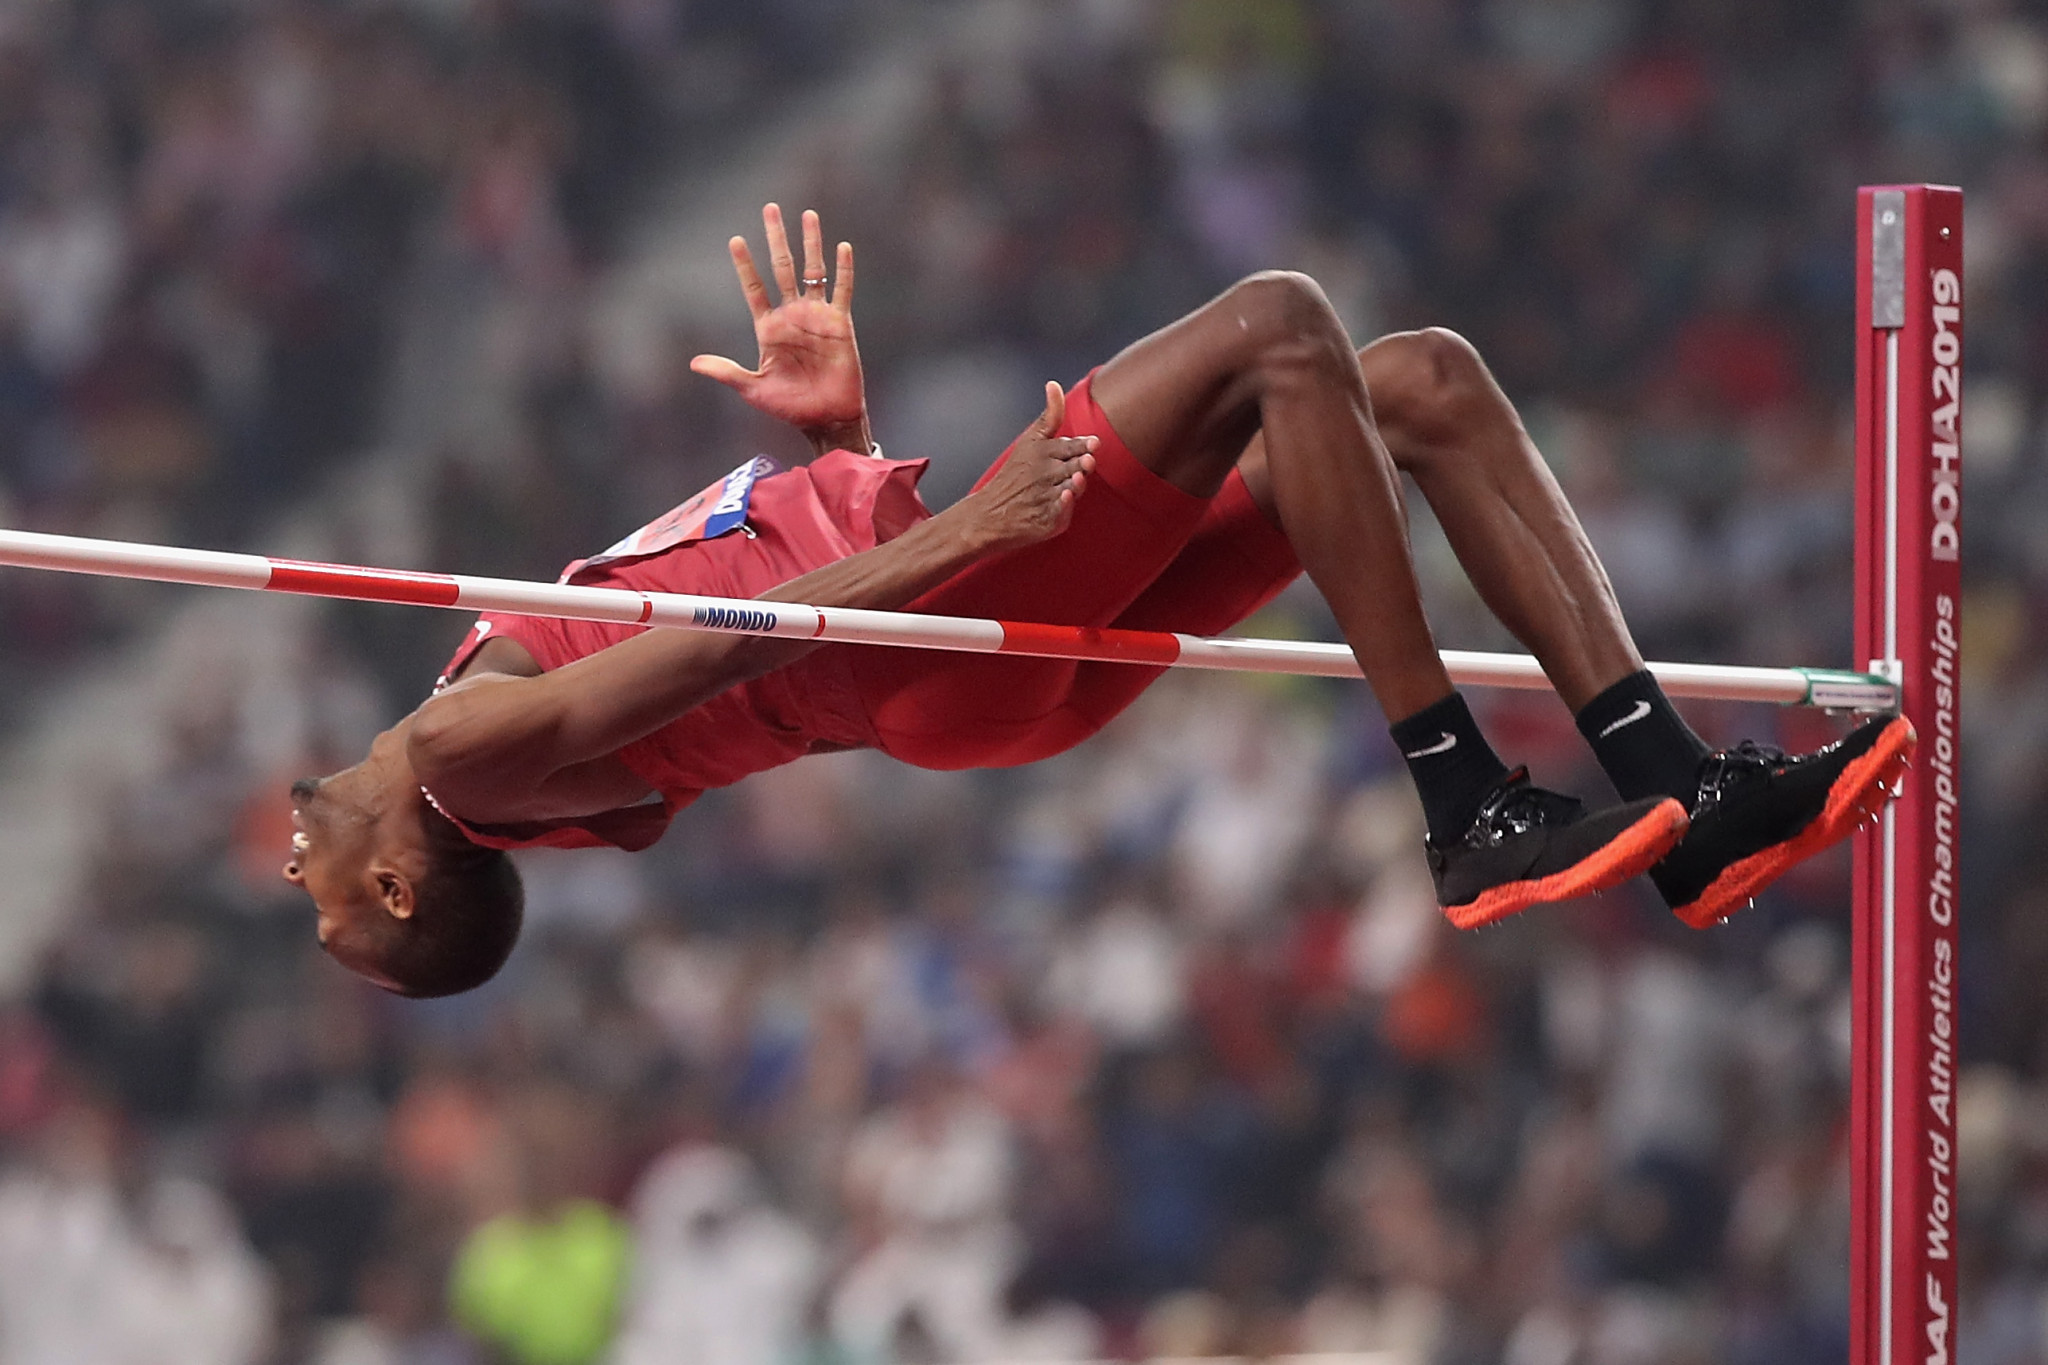 Qatar's two-time world high jump champion Mutaz Essa Barshim is among the 30 candidates for election to the Commission ©Getty Images